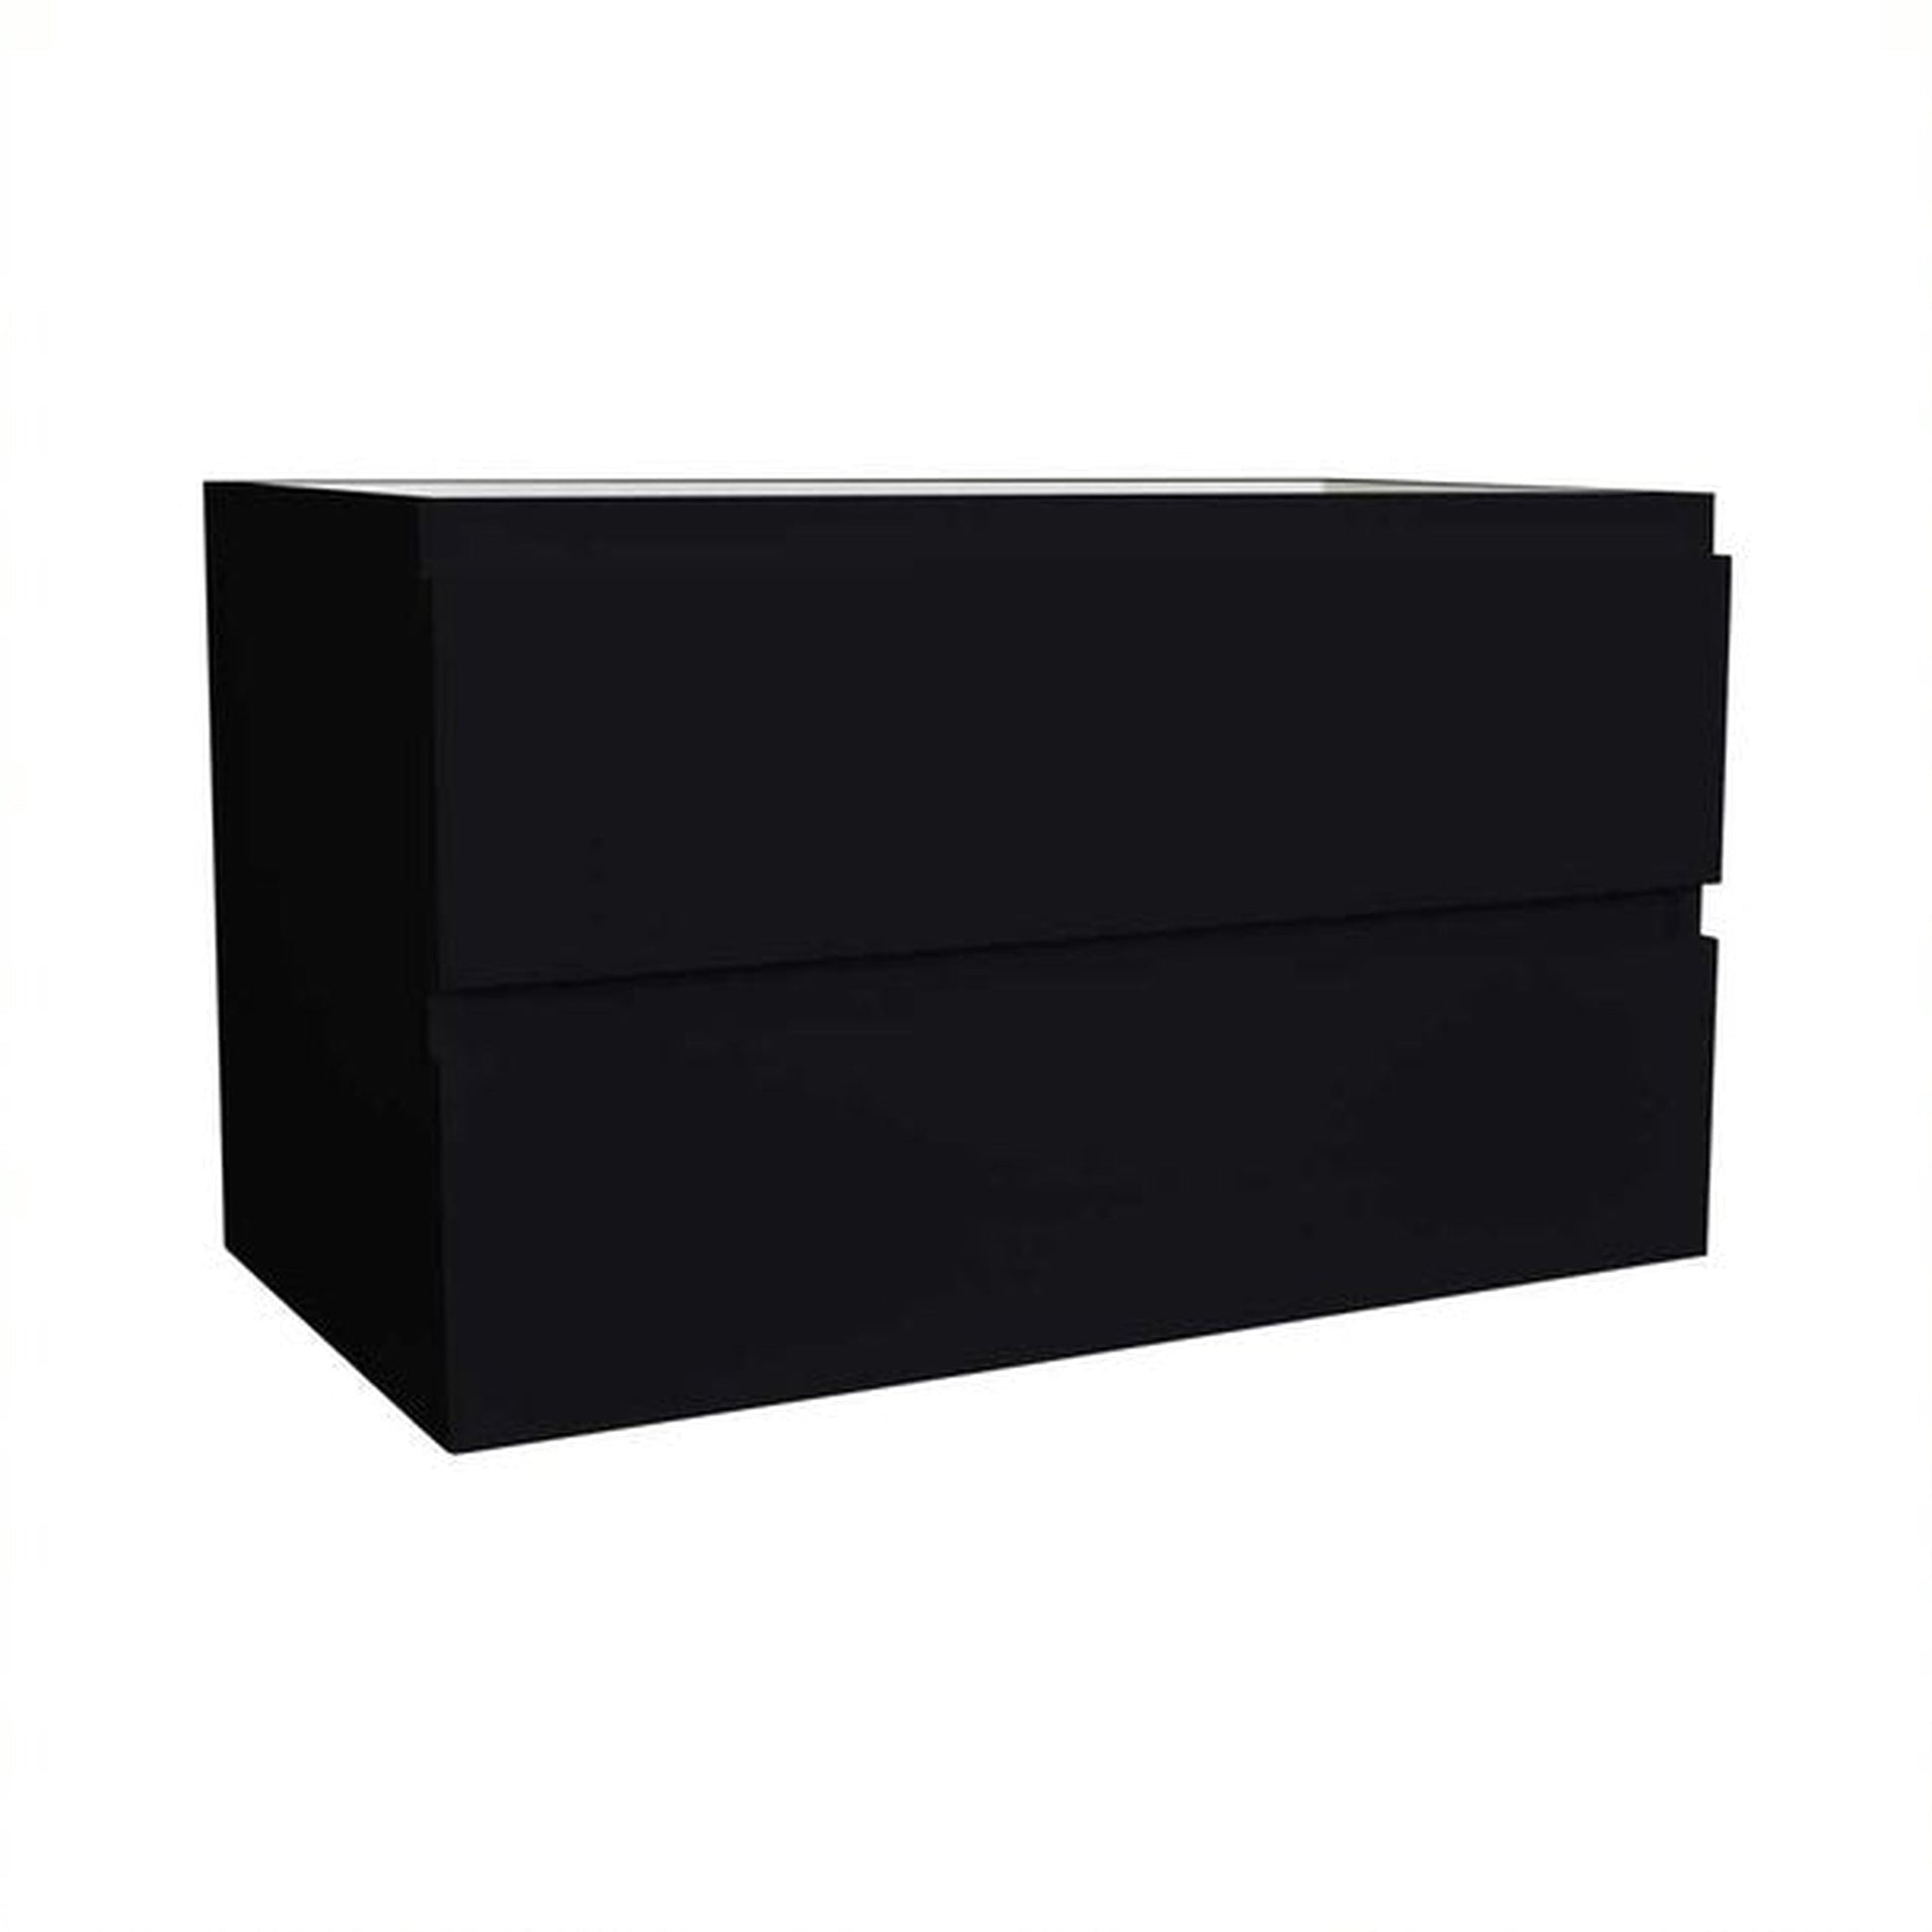 Volpa USA Salt 36" x 18" Glossy Black Wall-Mounted Floating Bathroom Vanity Cabinet with Drawers